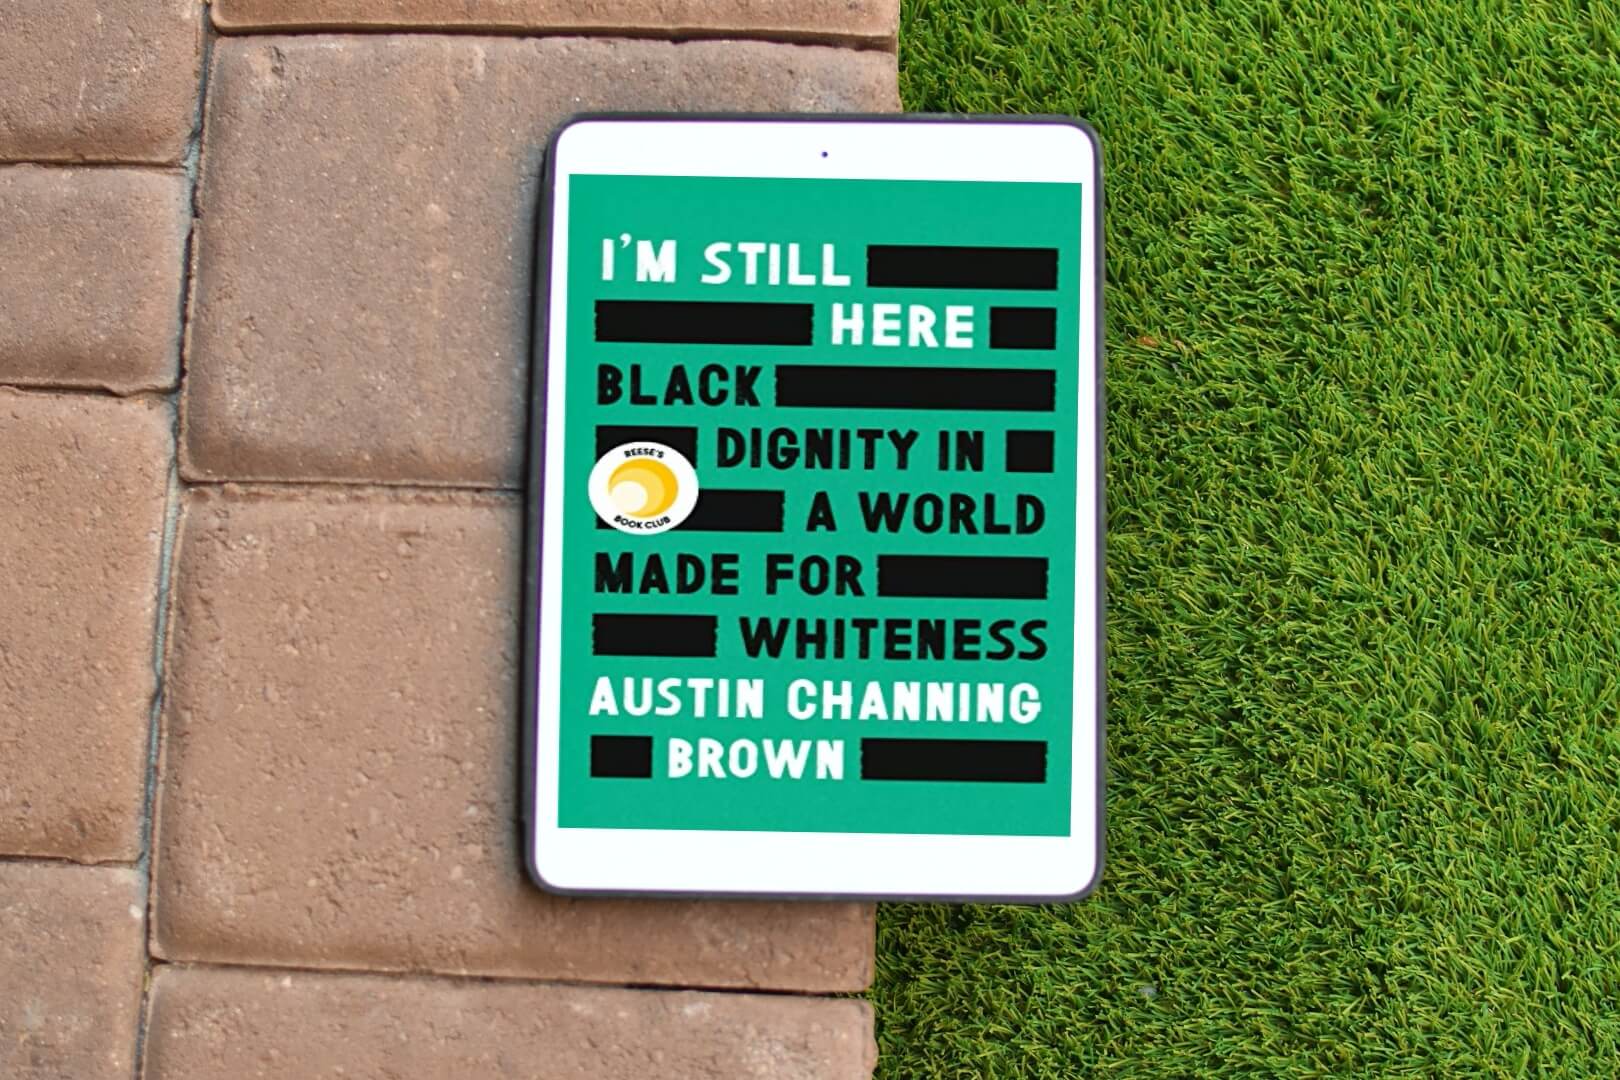 Review: I’m Still Here: Black Dignity in a World Made for Whiteness by Austin Channing Brown